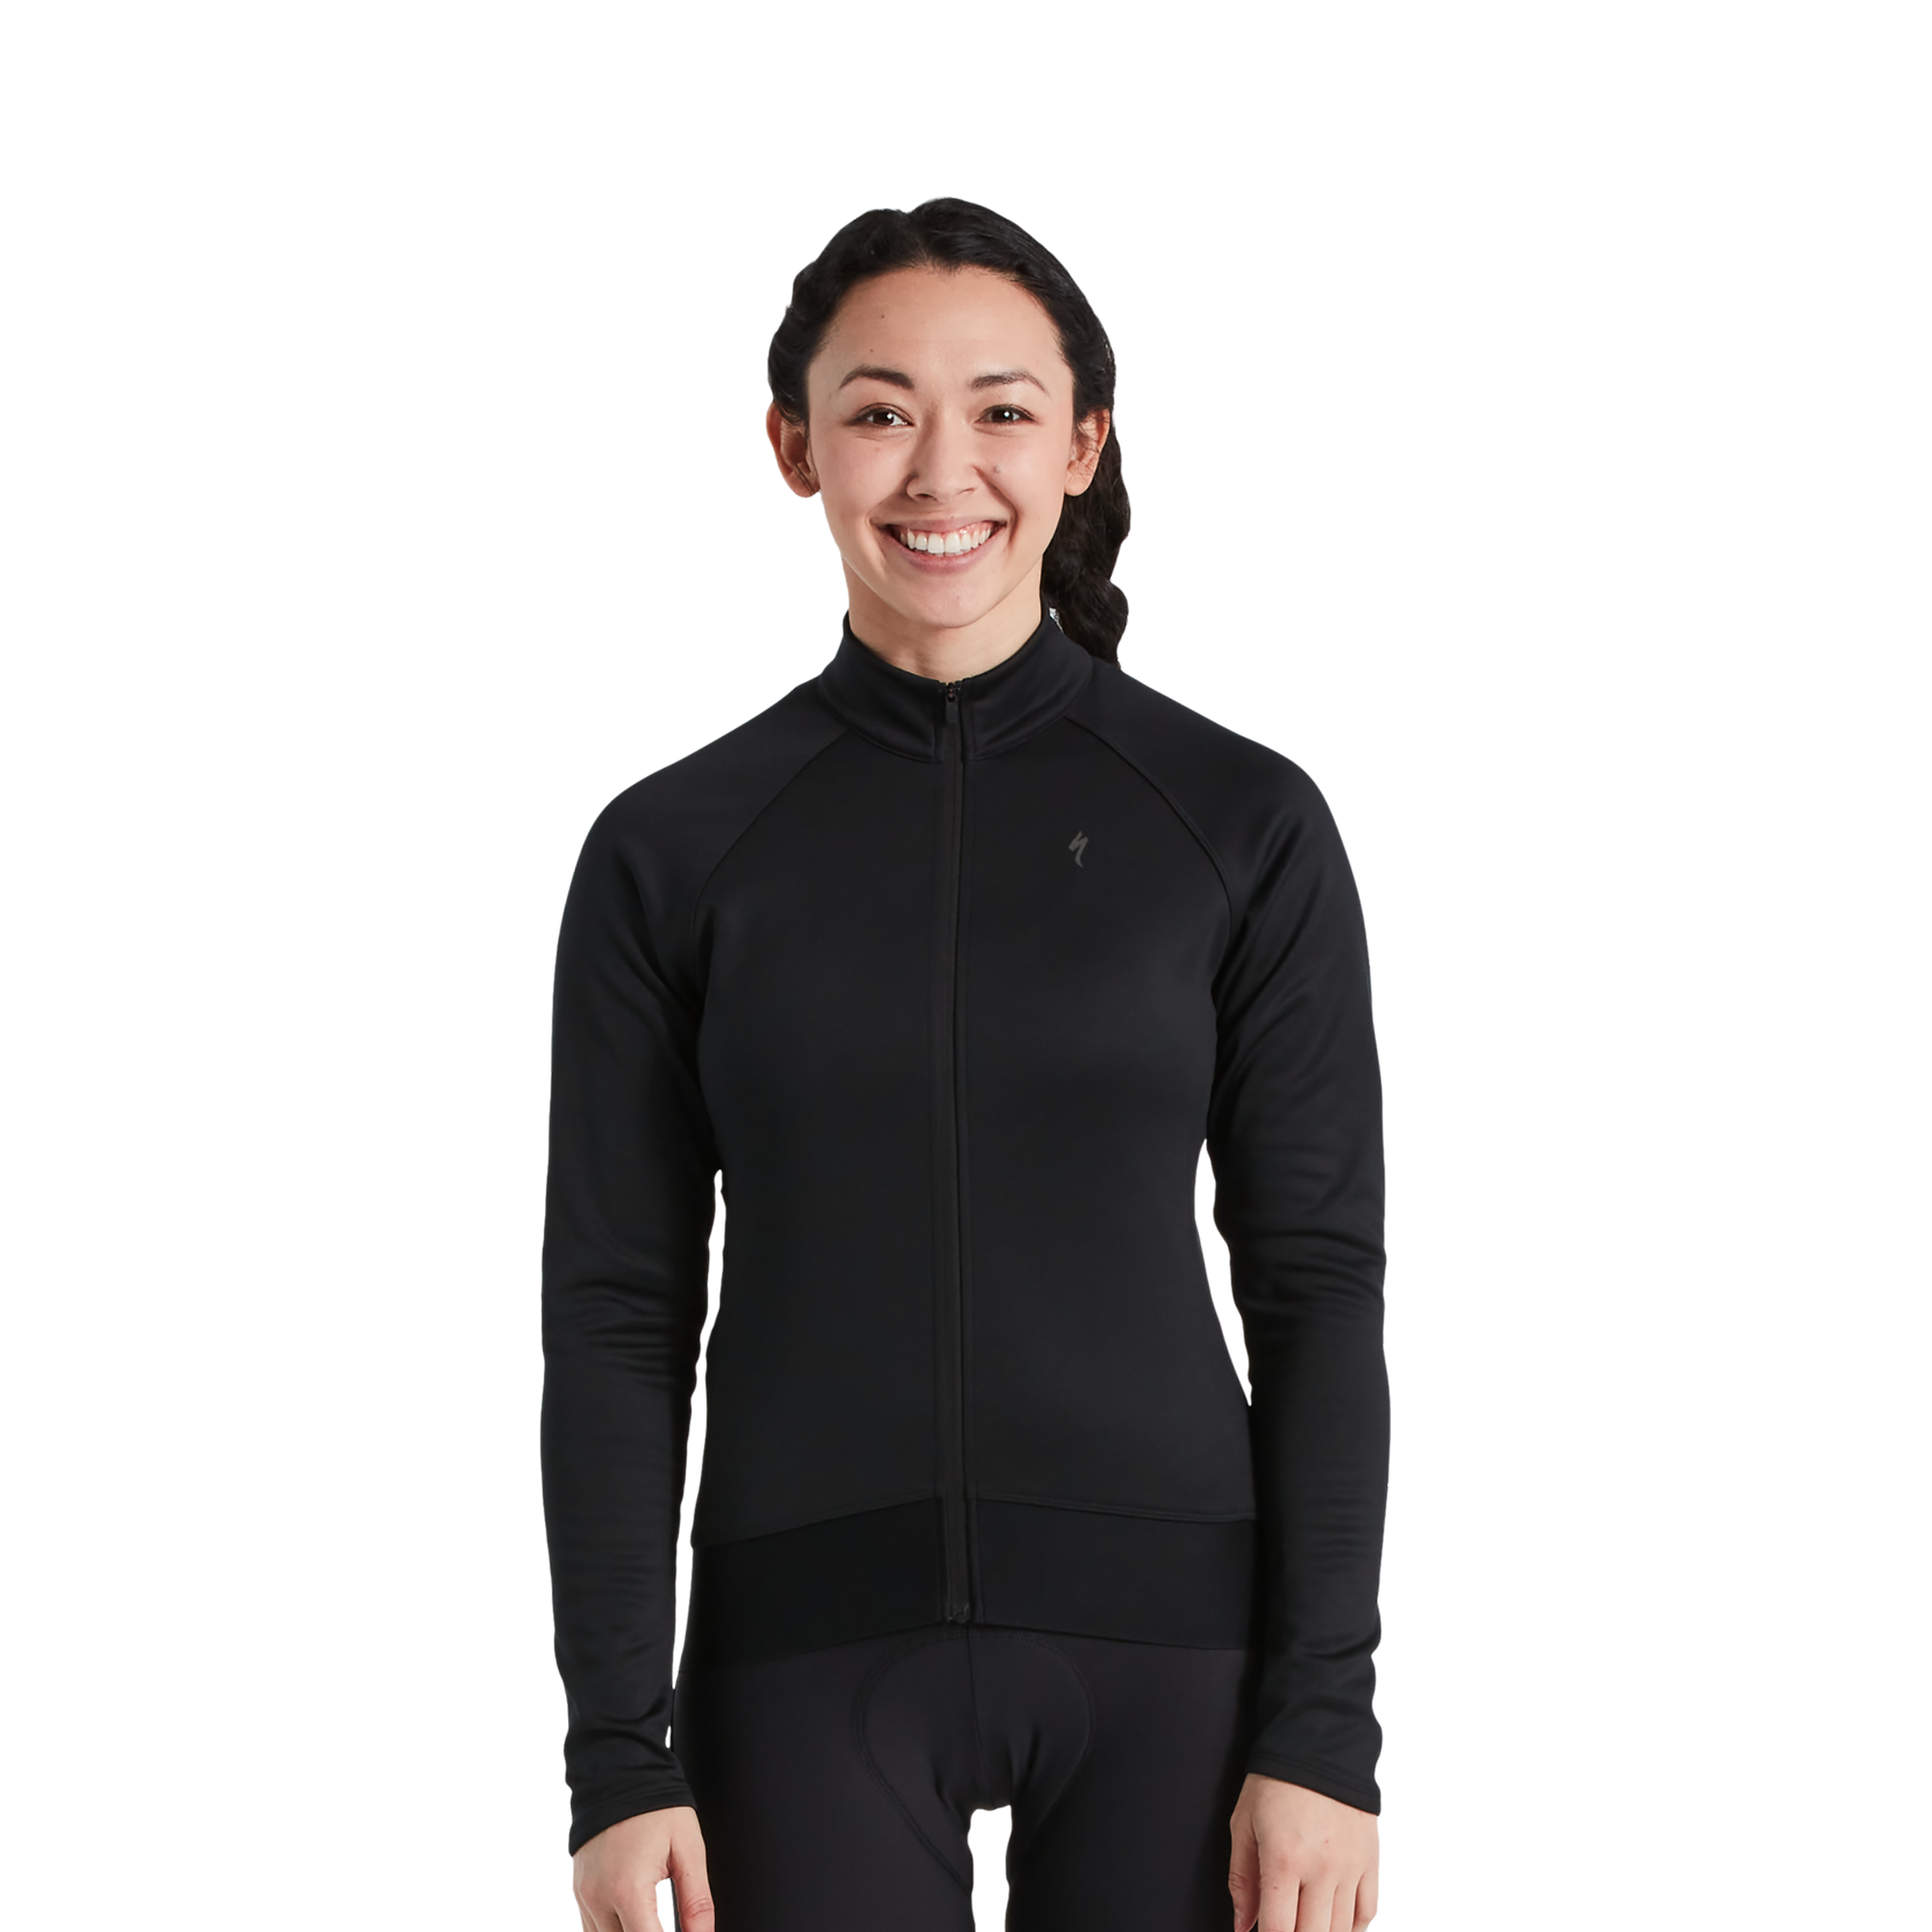 Maillot manches longues Femme - RBX Expert Thermal